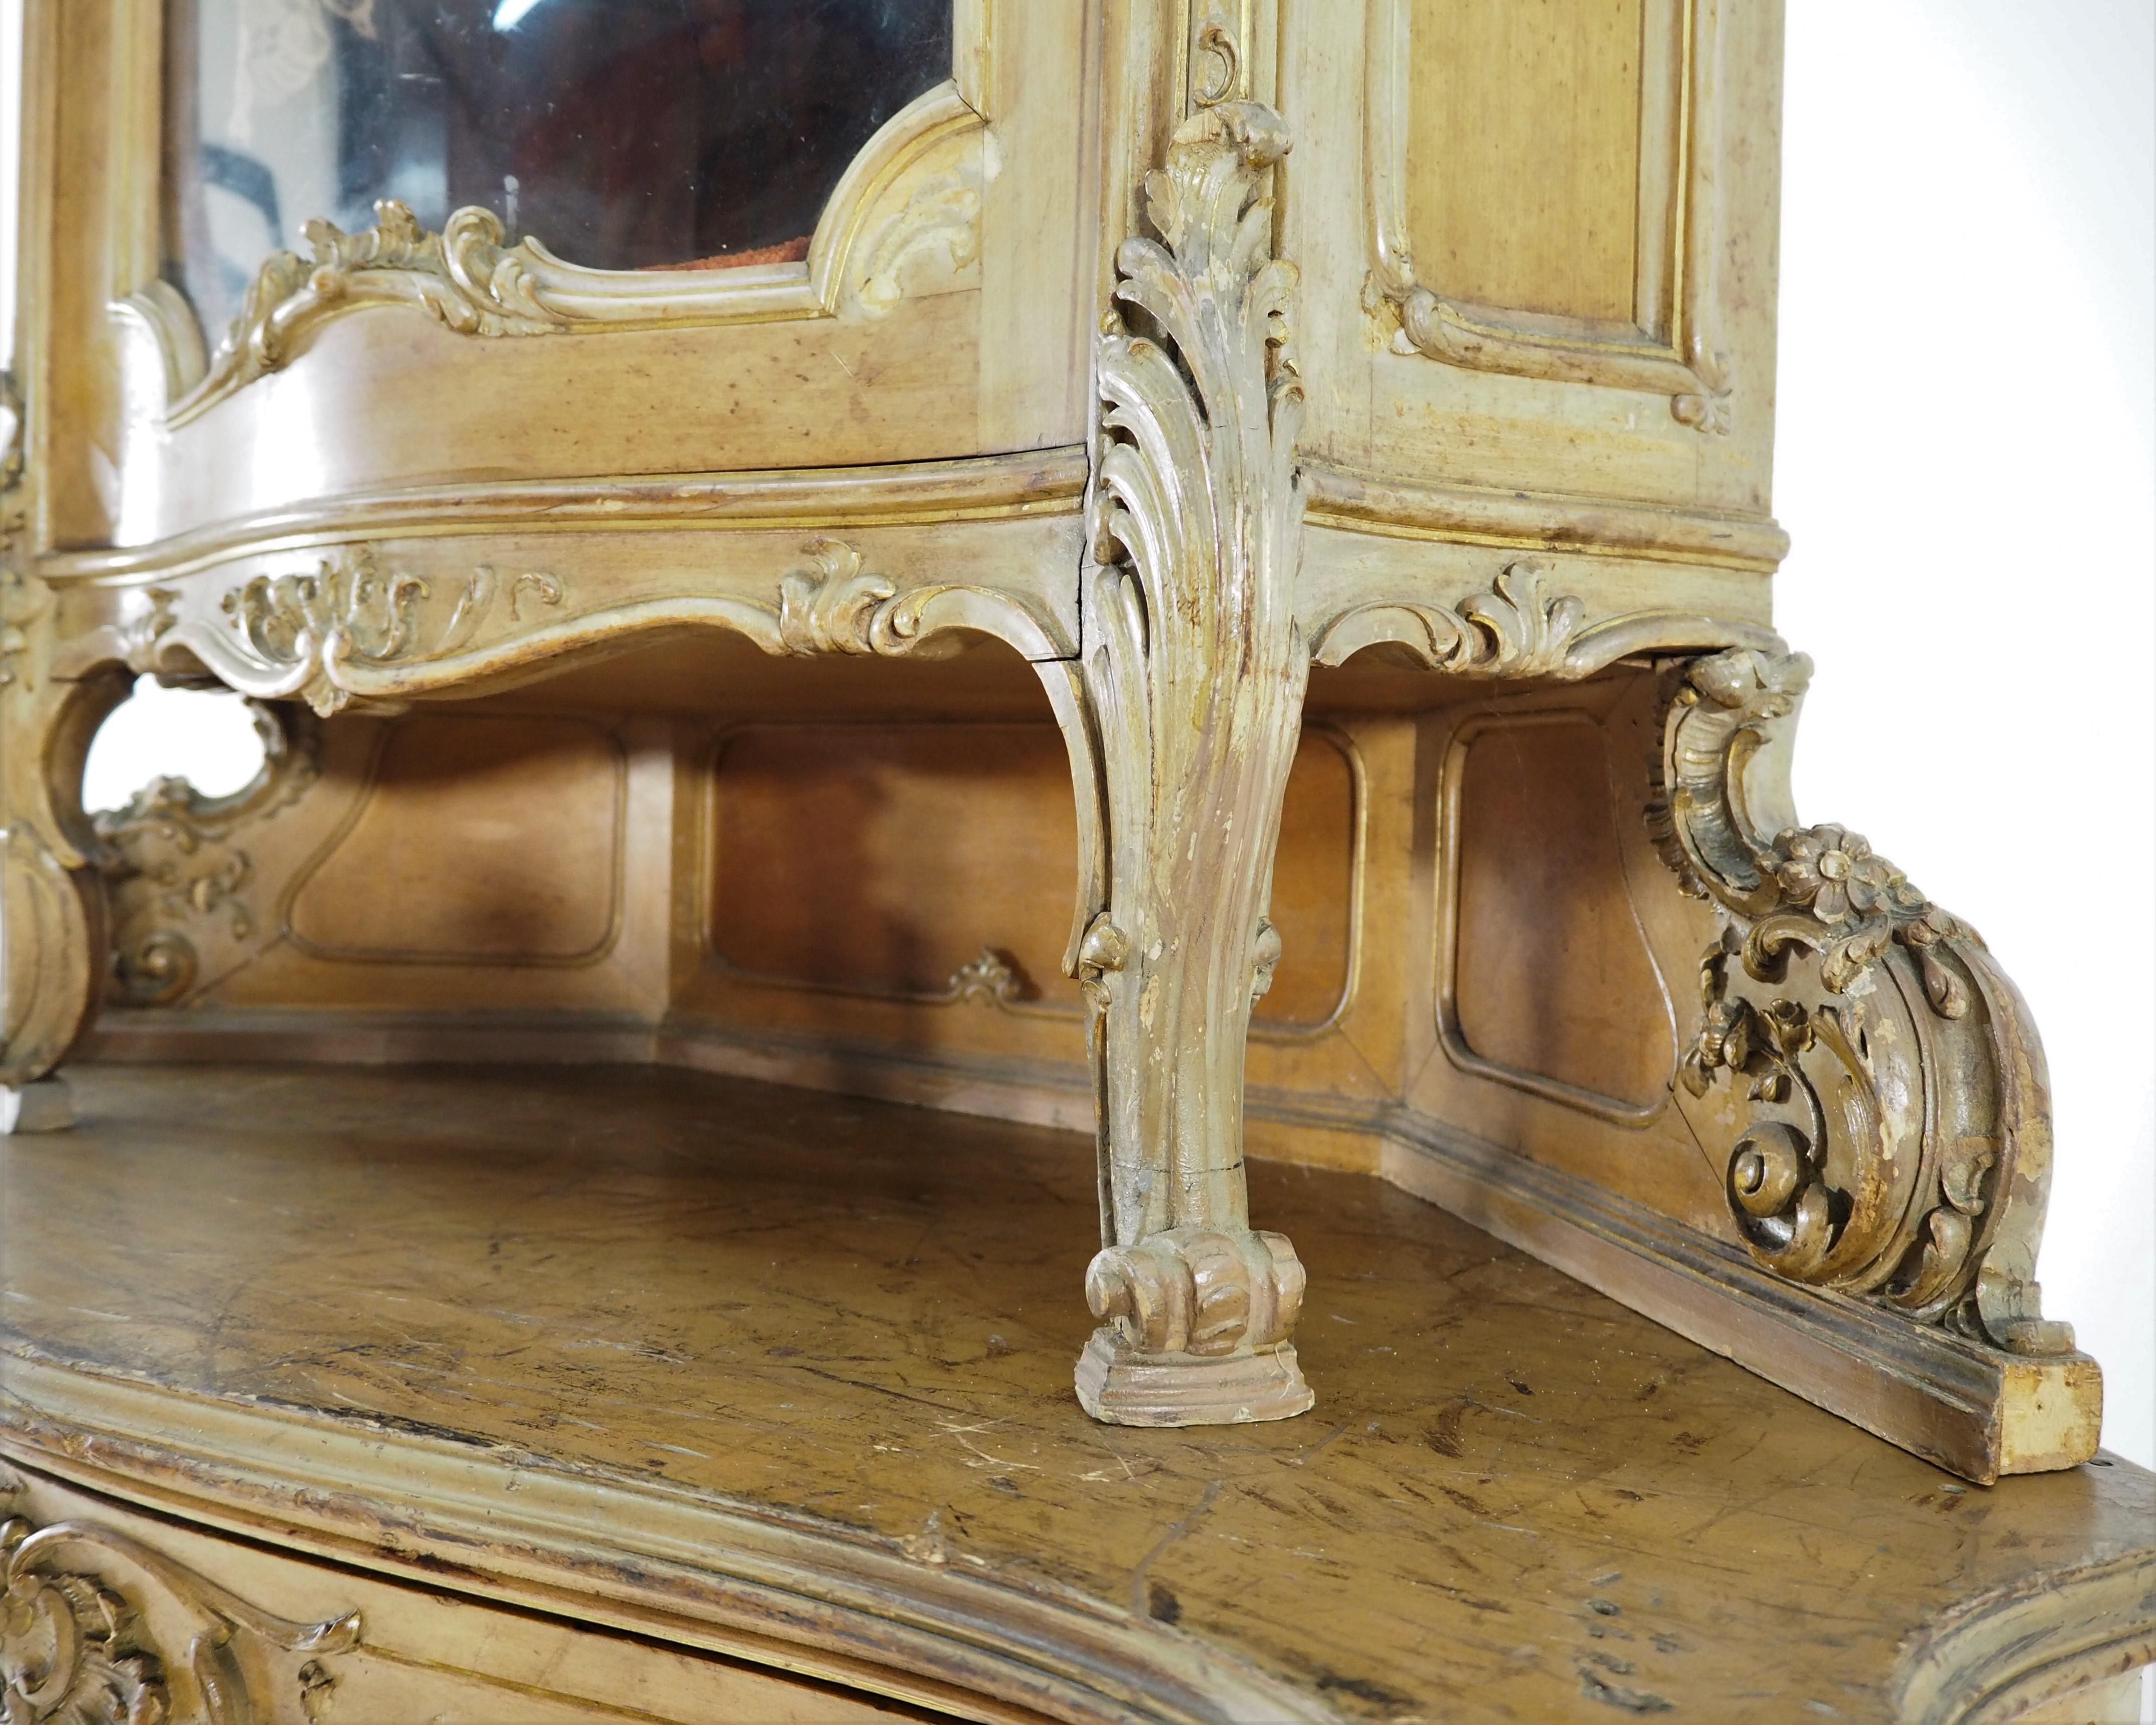 Rococo cupboard, 1920s. Original condition. Will look wonderful in a living room or dining room. Its unique form and beautiful shape impresses. Dimensions: Height 195 cm, width 106 cm, depth 52 cm.